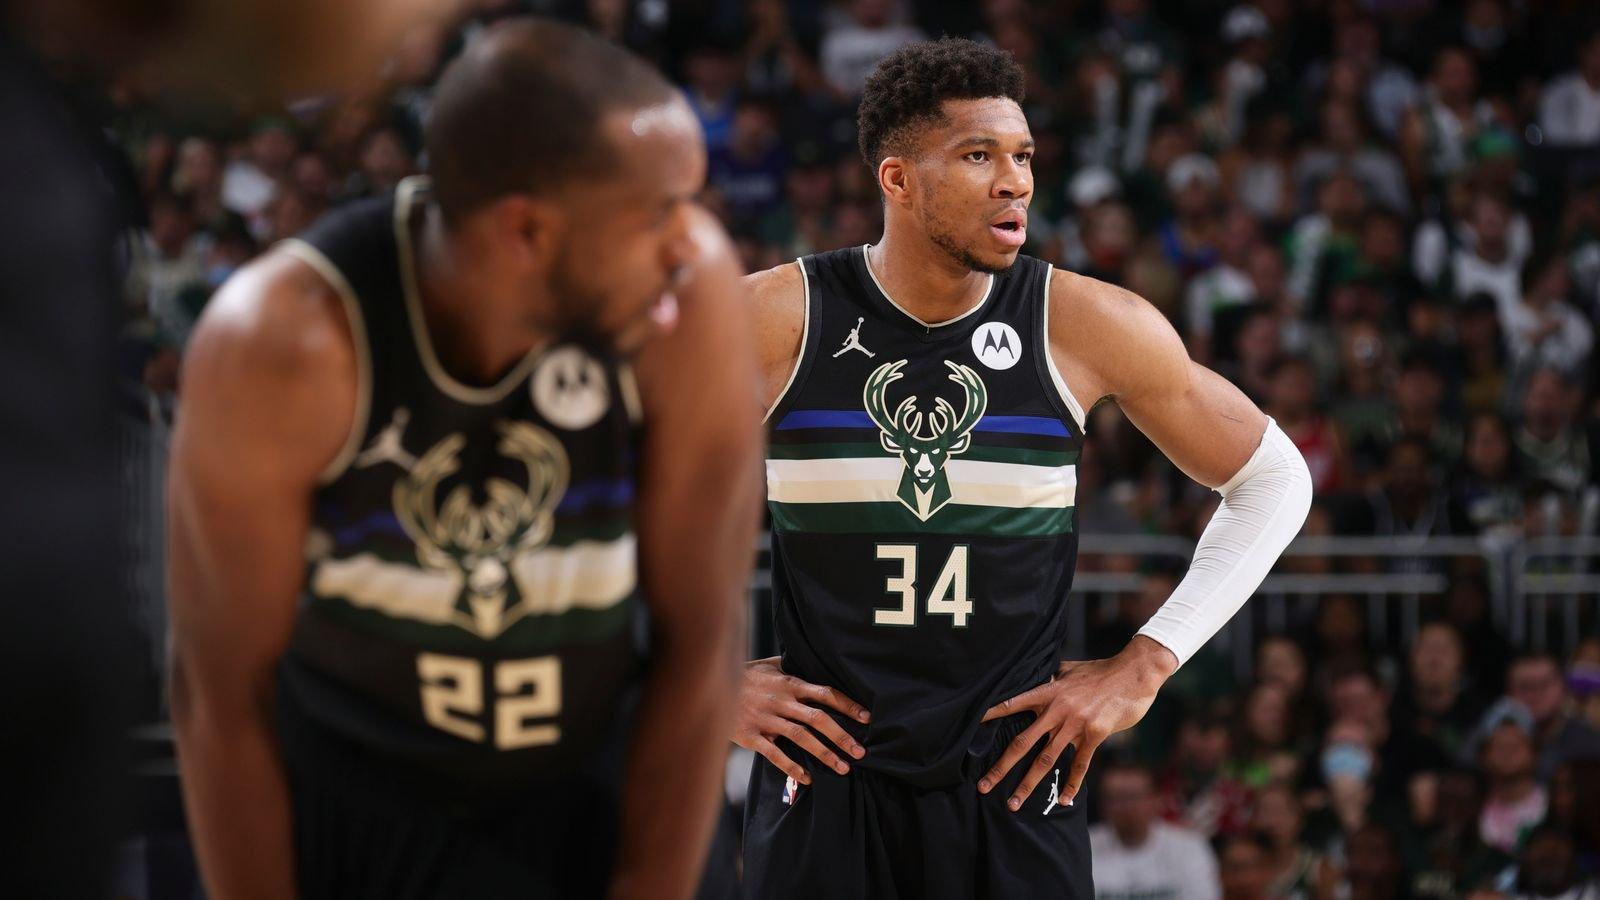 Bucks vs Nets Game 7 Betting Preview: The Market is Having a Hard Time Choosing a Favorite With Everything on the Line